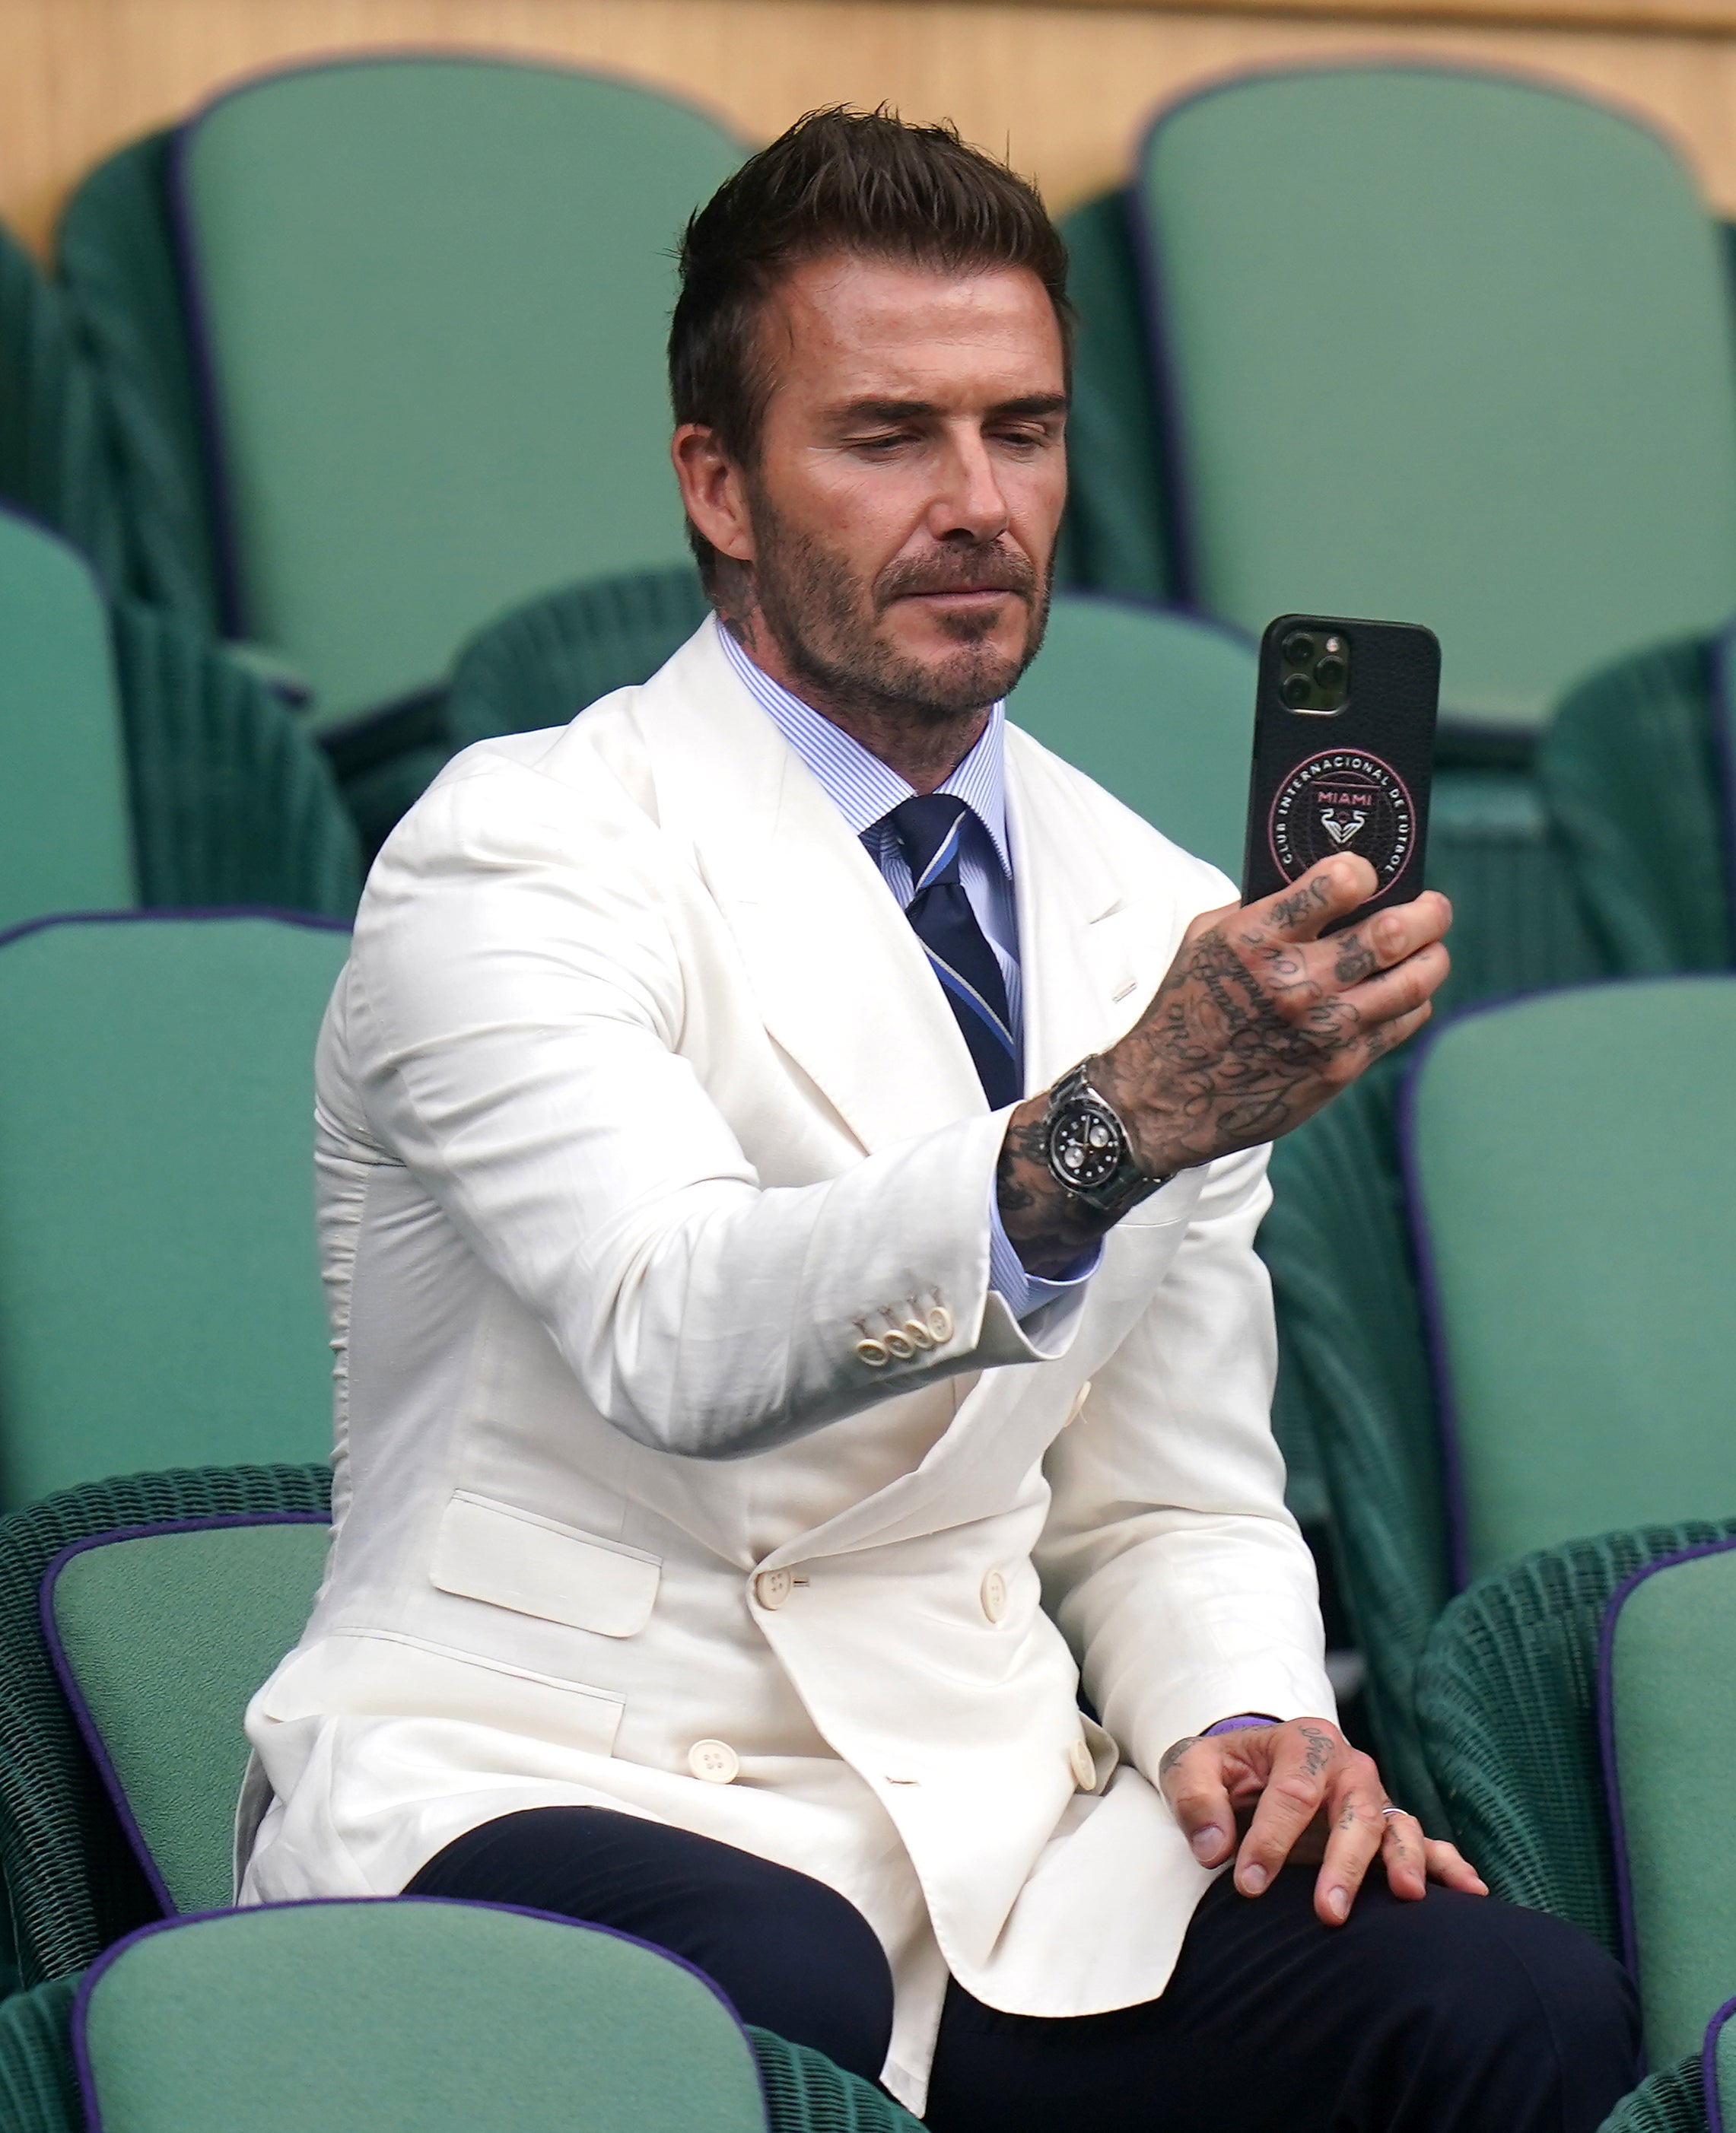 The woman claims to have had a relationship with David Beckham, which he denies